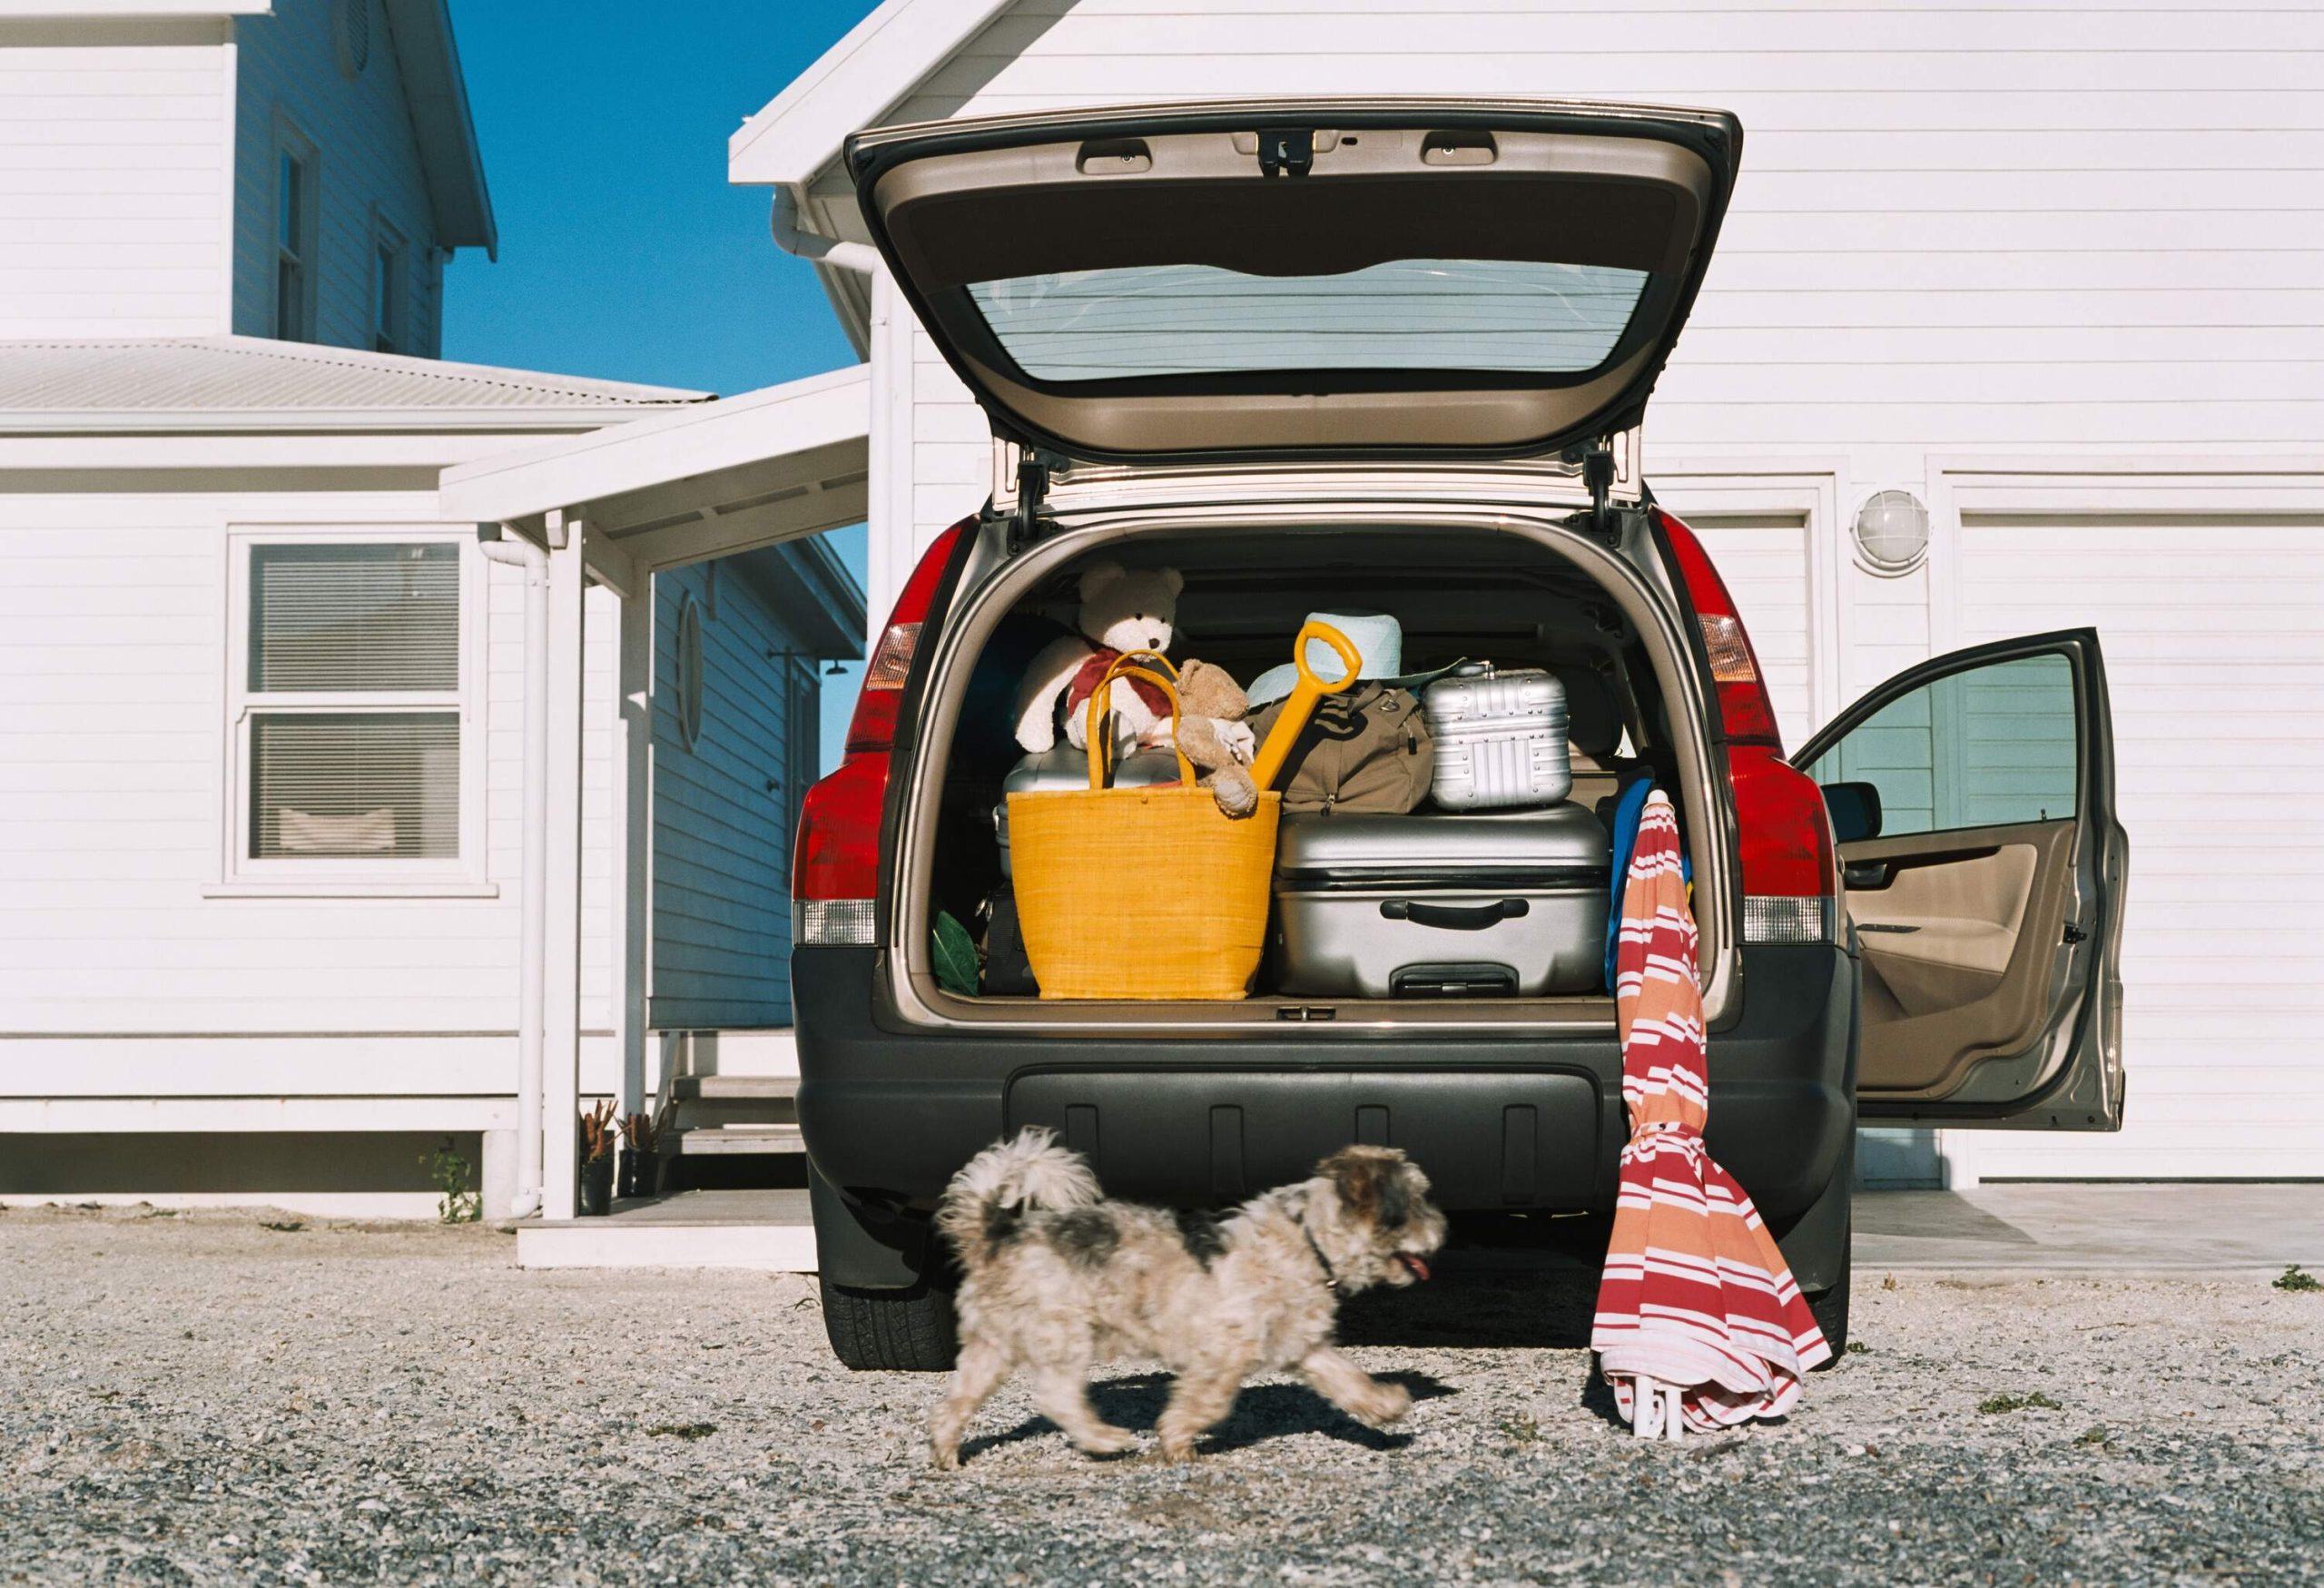 A dog walking past a car with an open trunk containing luggage and toys.